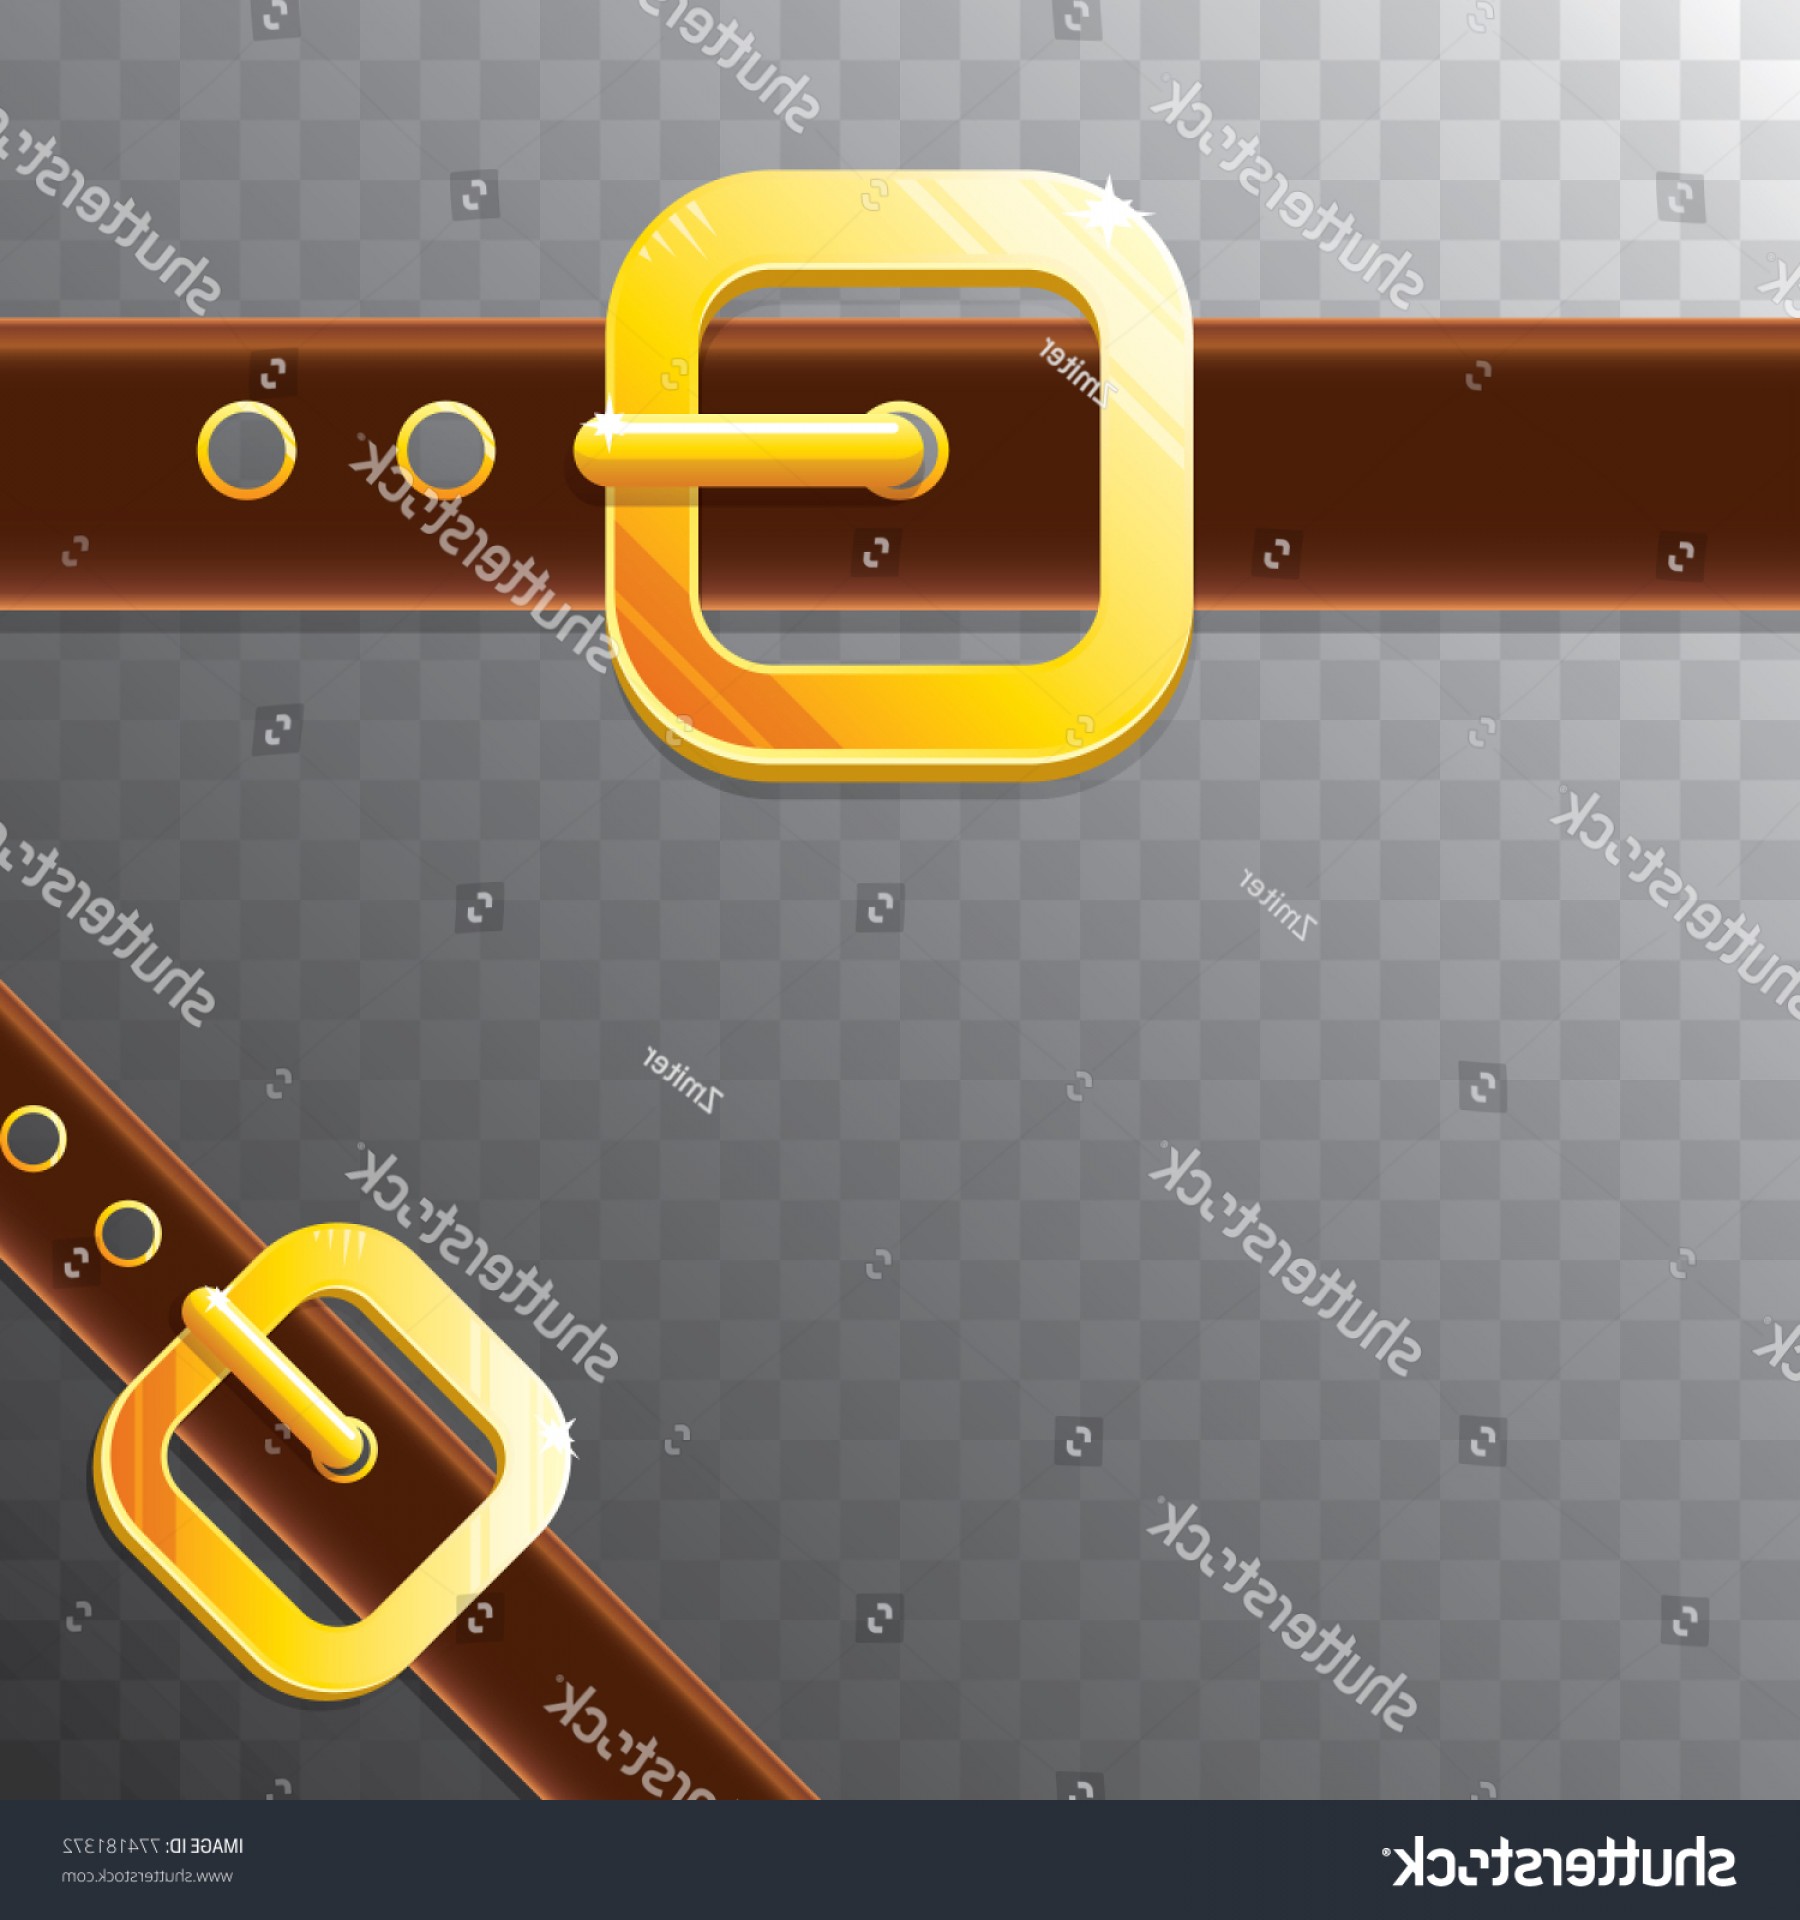 Leather Belt Vector at Vectorified.com | Collection of Leather Belt ...